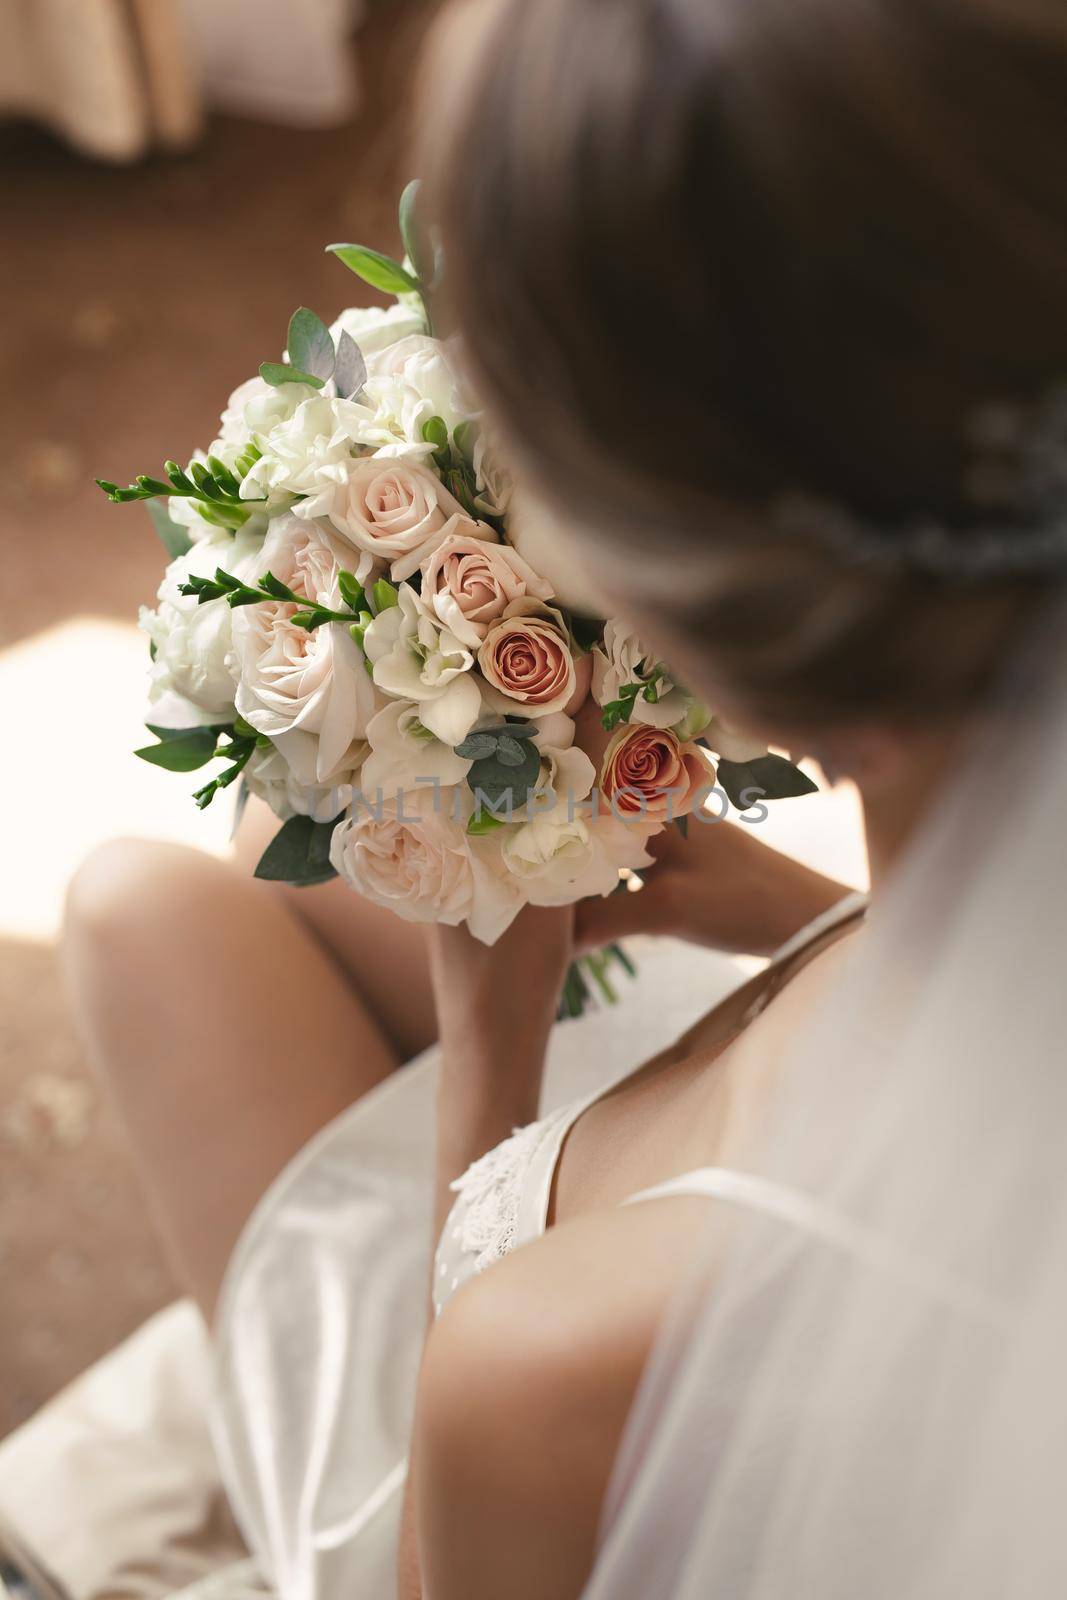 Luxury white wedding bouquet in the hands of the bride by StudioPeace